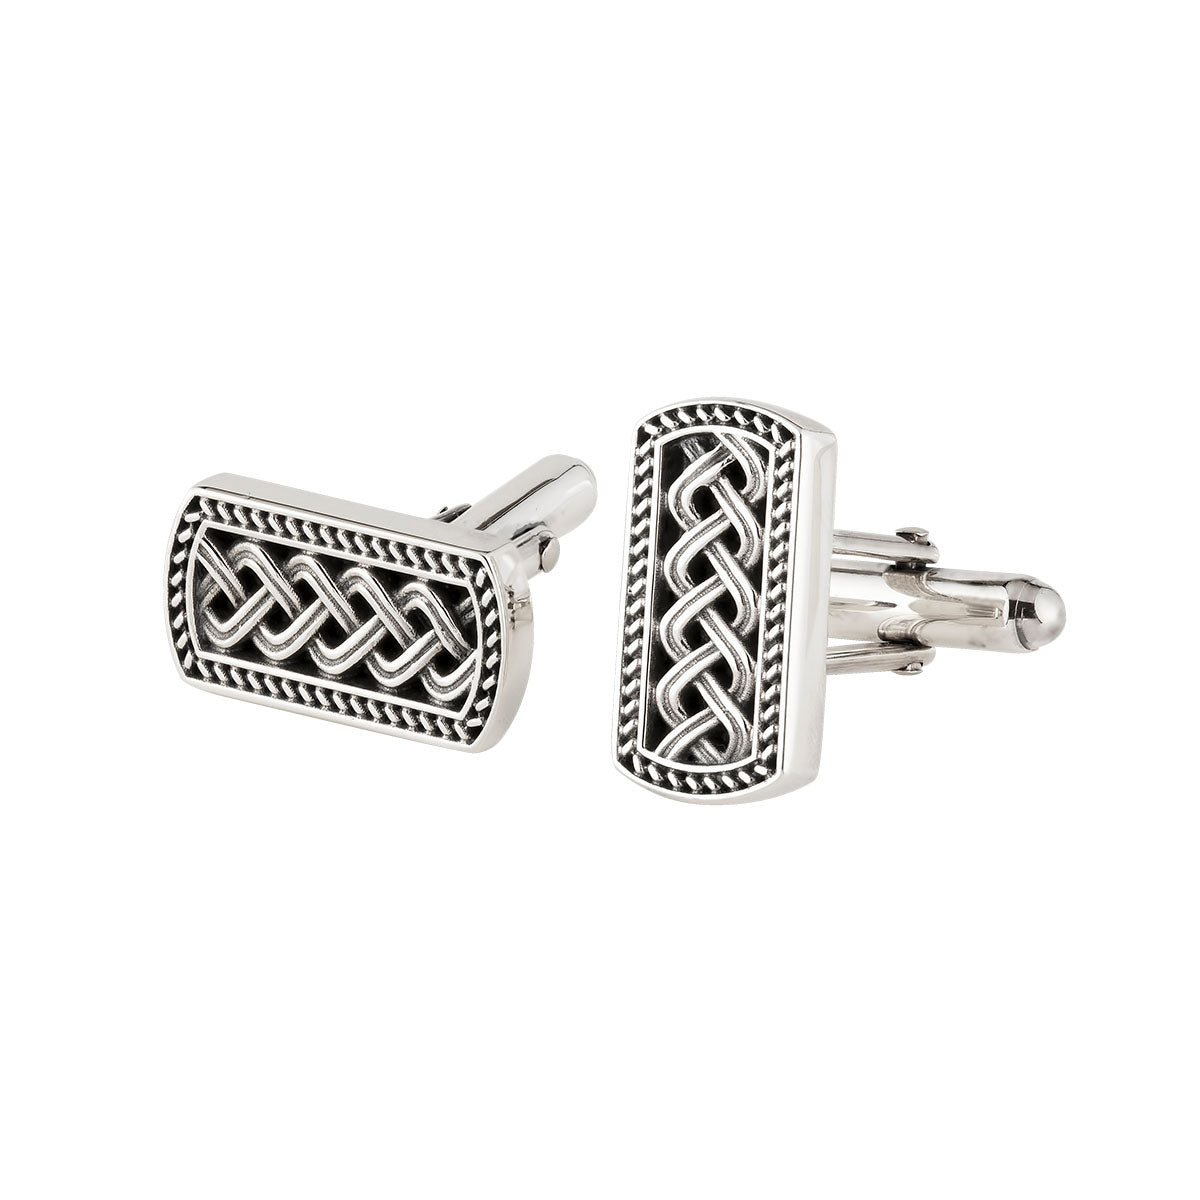 sterling silver ignot style celtic cufflinks S6523 from Solver